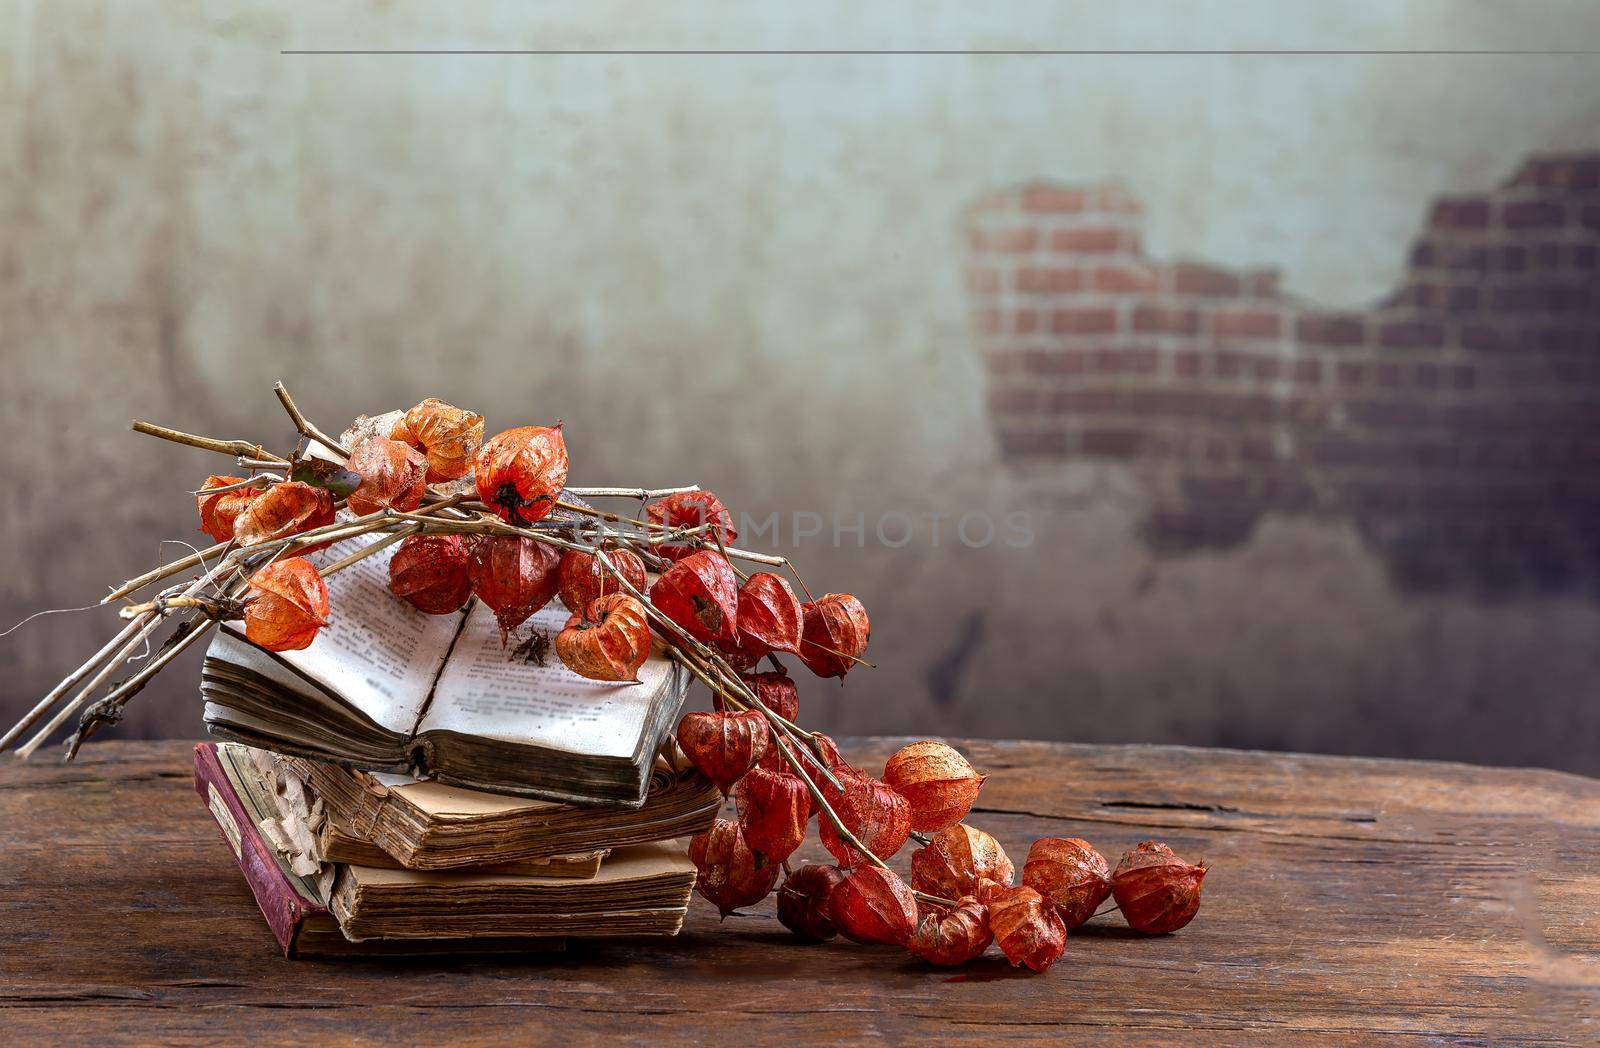 Old books -conceptual image, vintage effect, old book with dry flowers by JPC-PROD